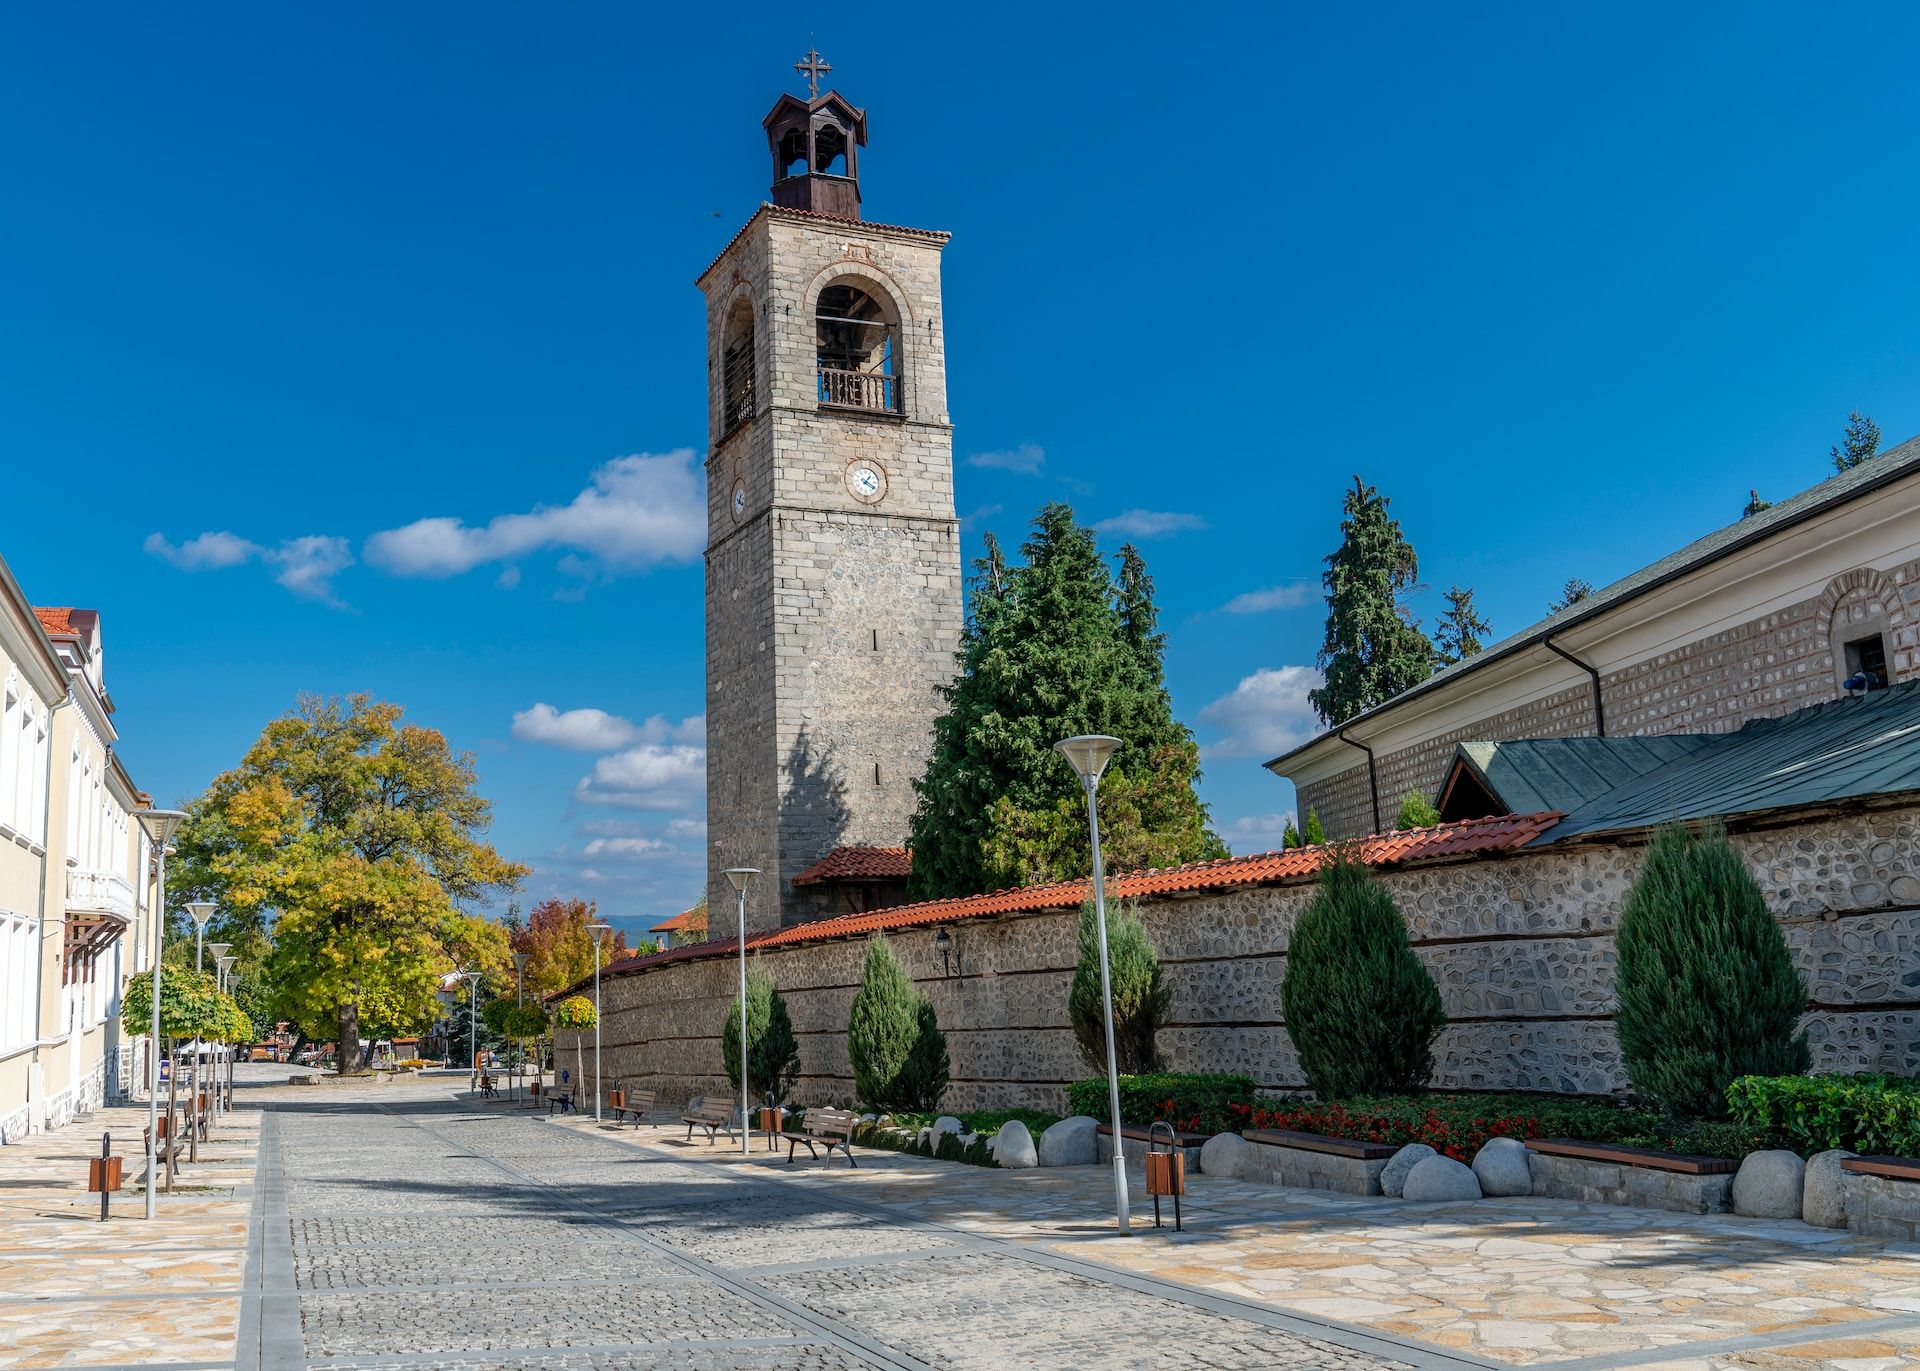 Street with a clock tower in Bansko, Bulgaria